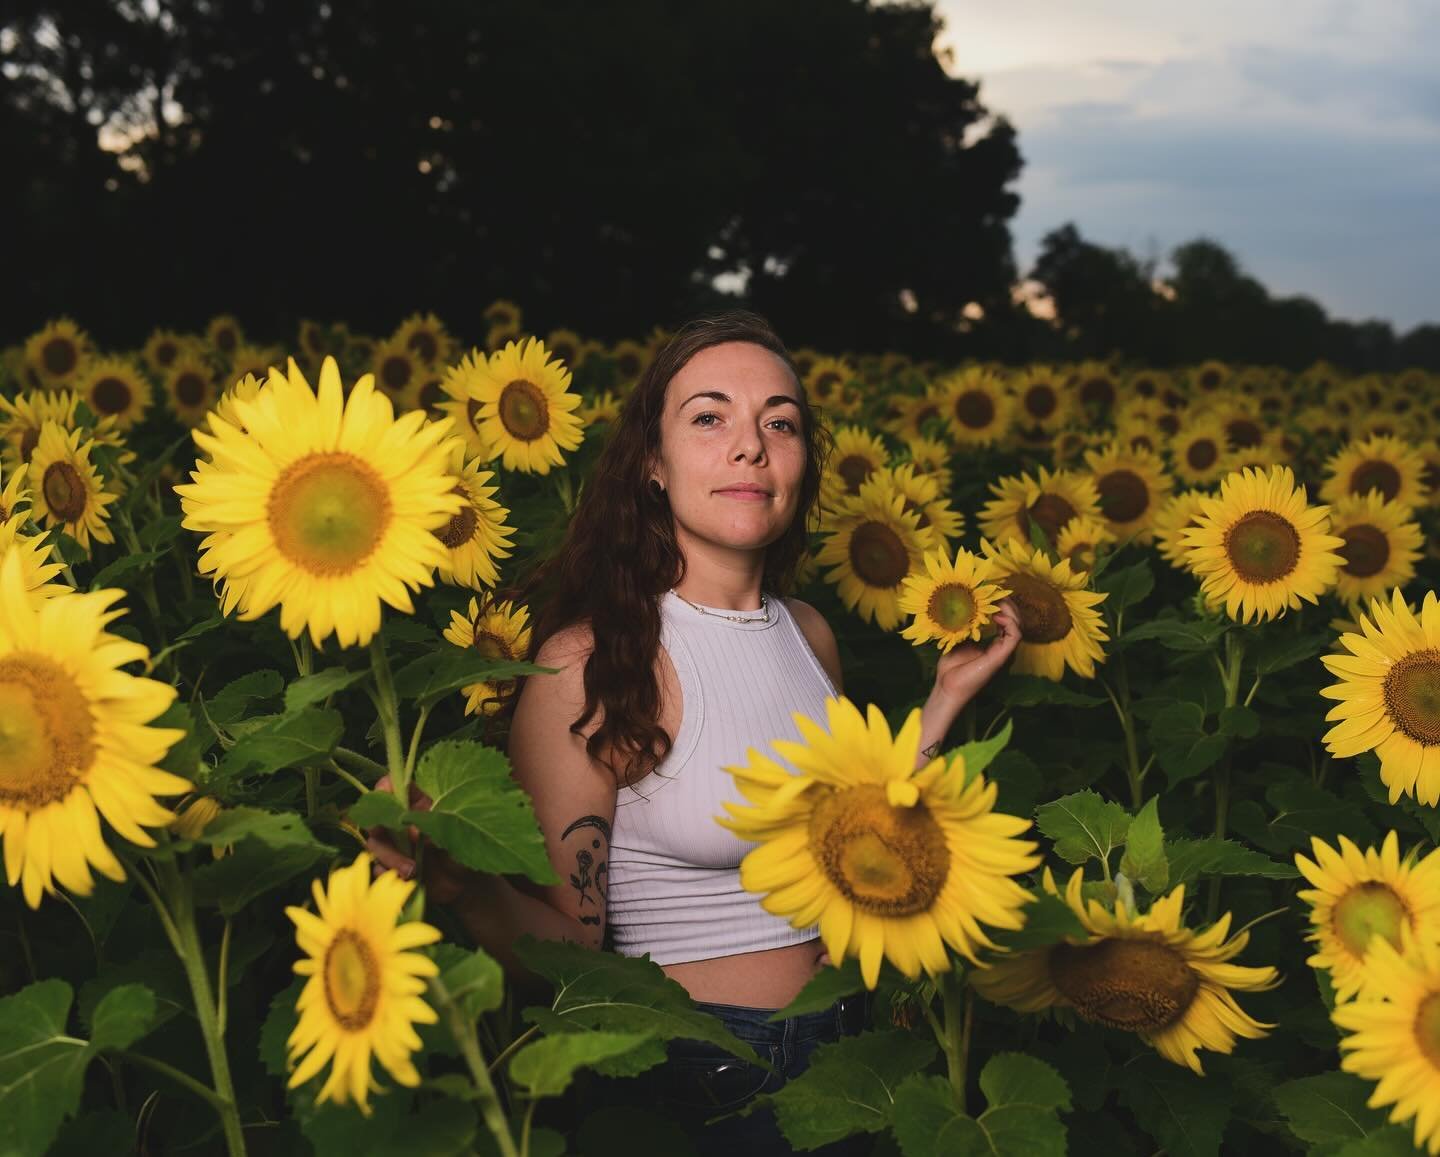 Happy Earth Day! 
Me, some sunflowers, and a few favorite paintings that celebrate the colors and critters on this beautiful green globe 🌱🌻

📸 of me credit: the fabulous @dannydouglasphotography